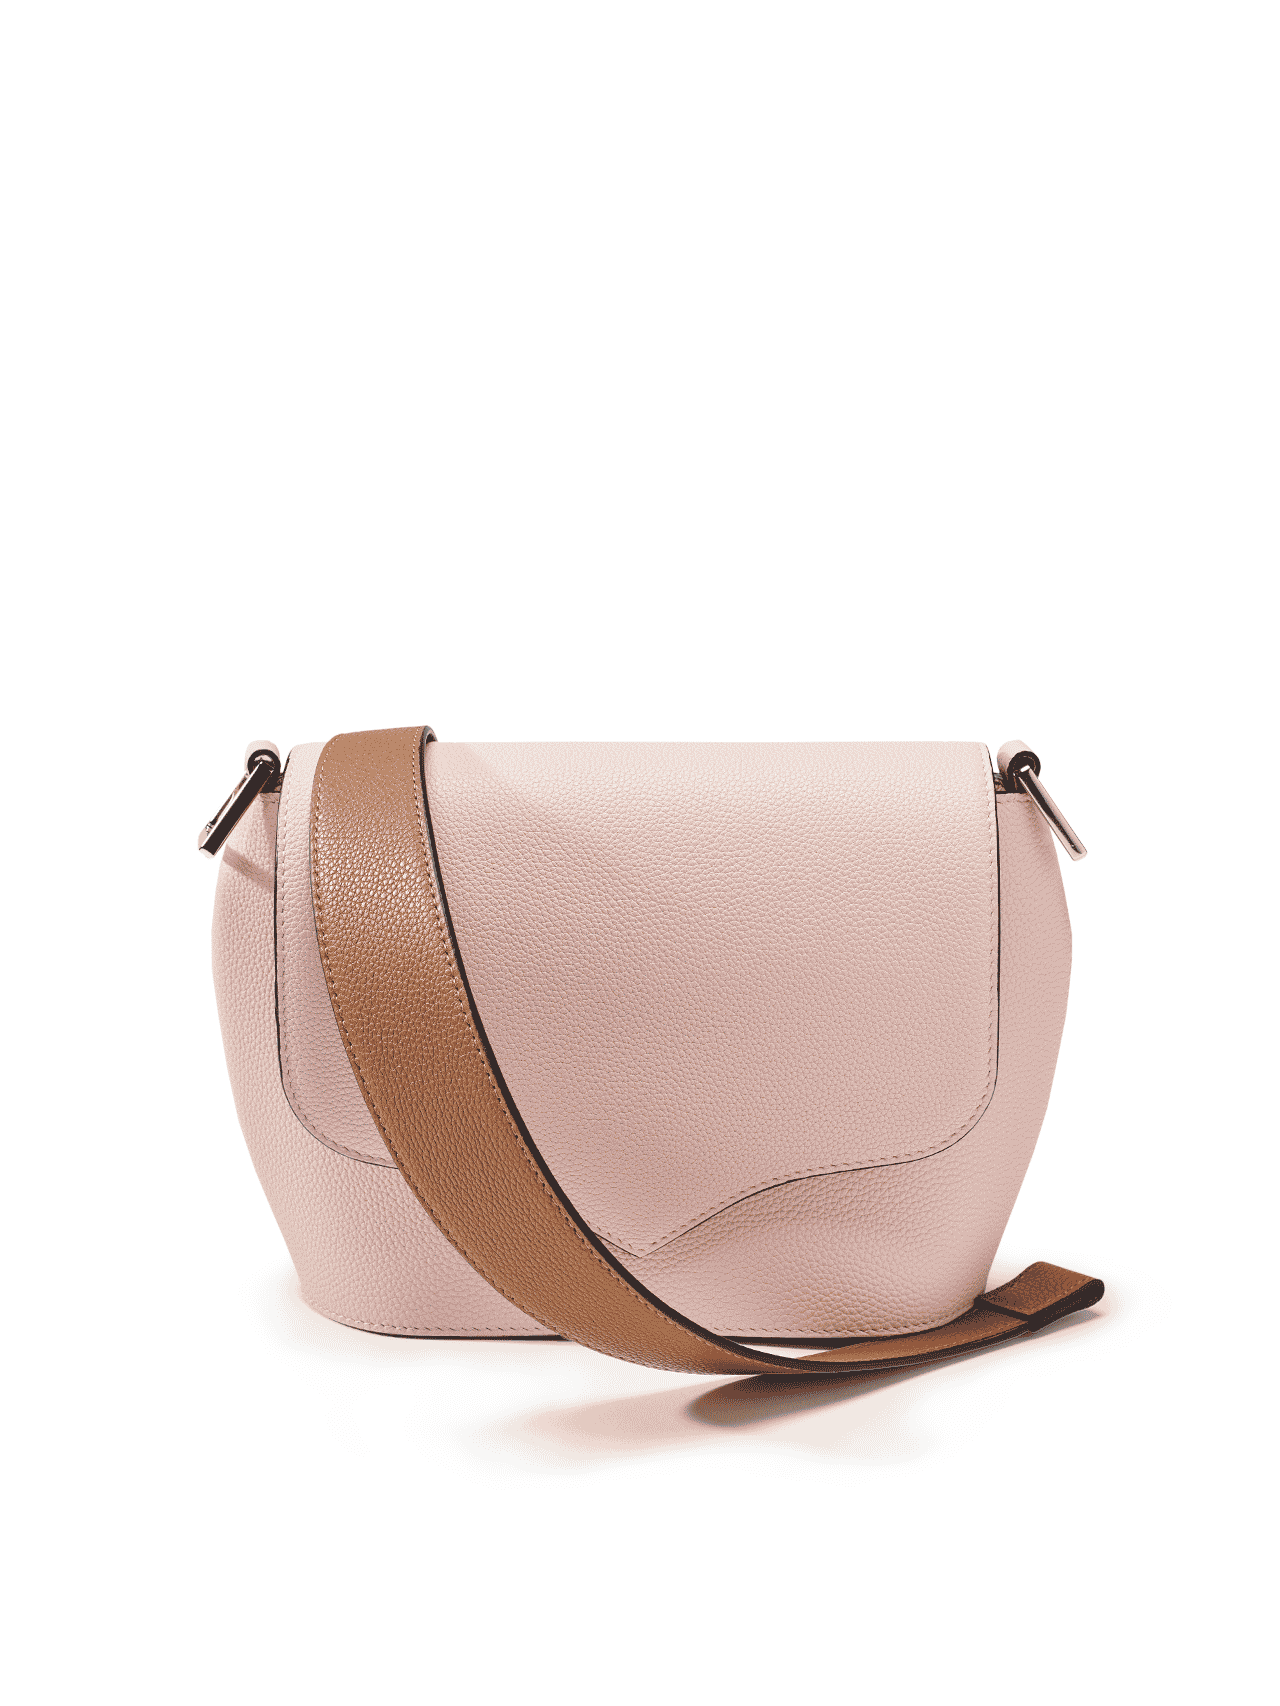 bag leather jean rousseau brown pink